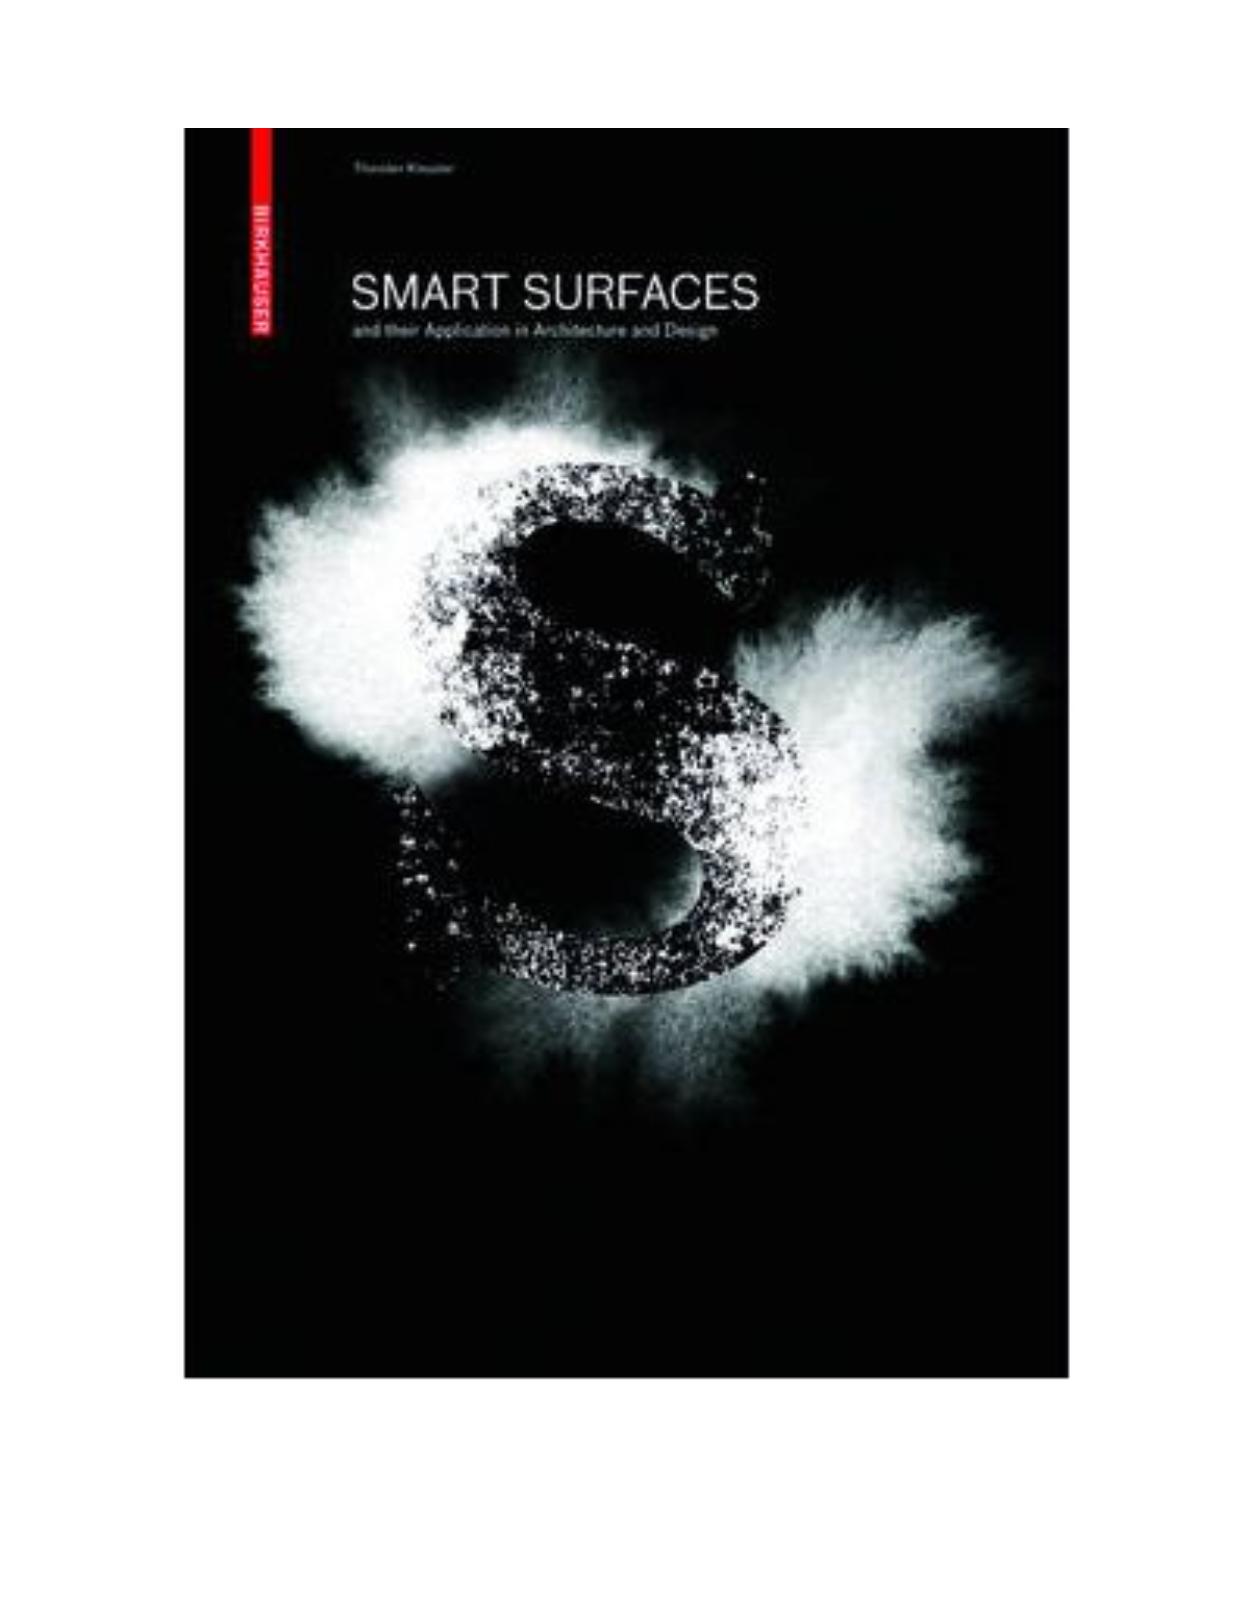 Smart Surfaces -- and Their Application in Architecture and Design